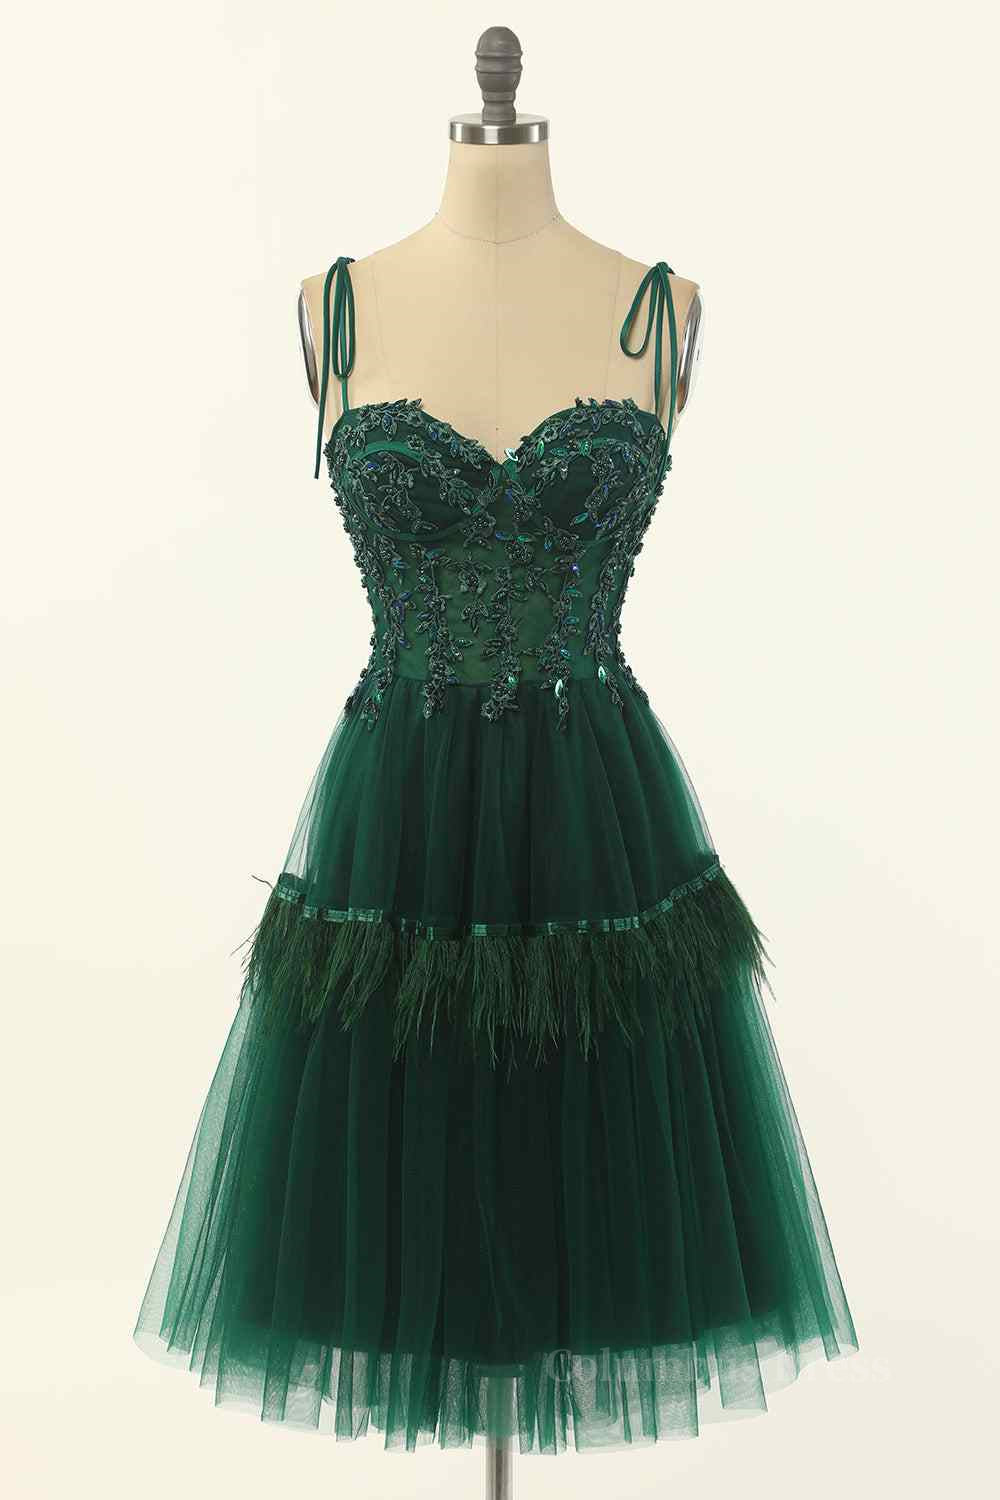 Long Black Dress, Dark Green A-line Bow Tie Straps Lace-Up Applique Mini Homecoming Dress